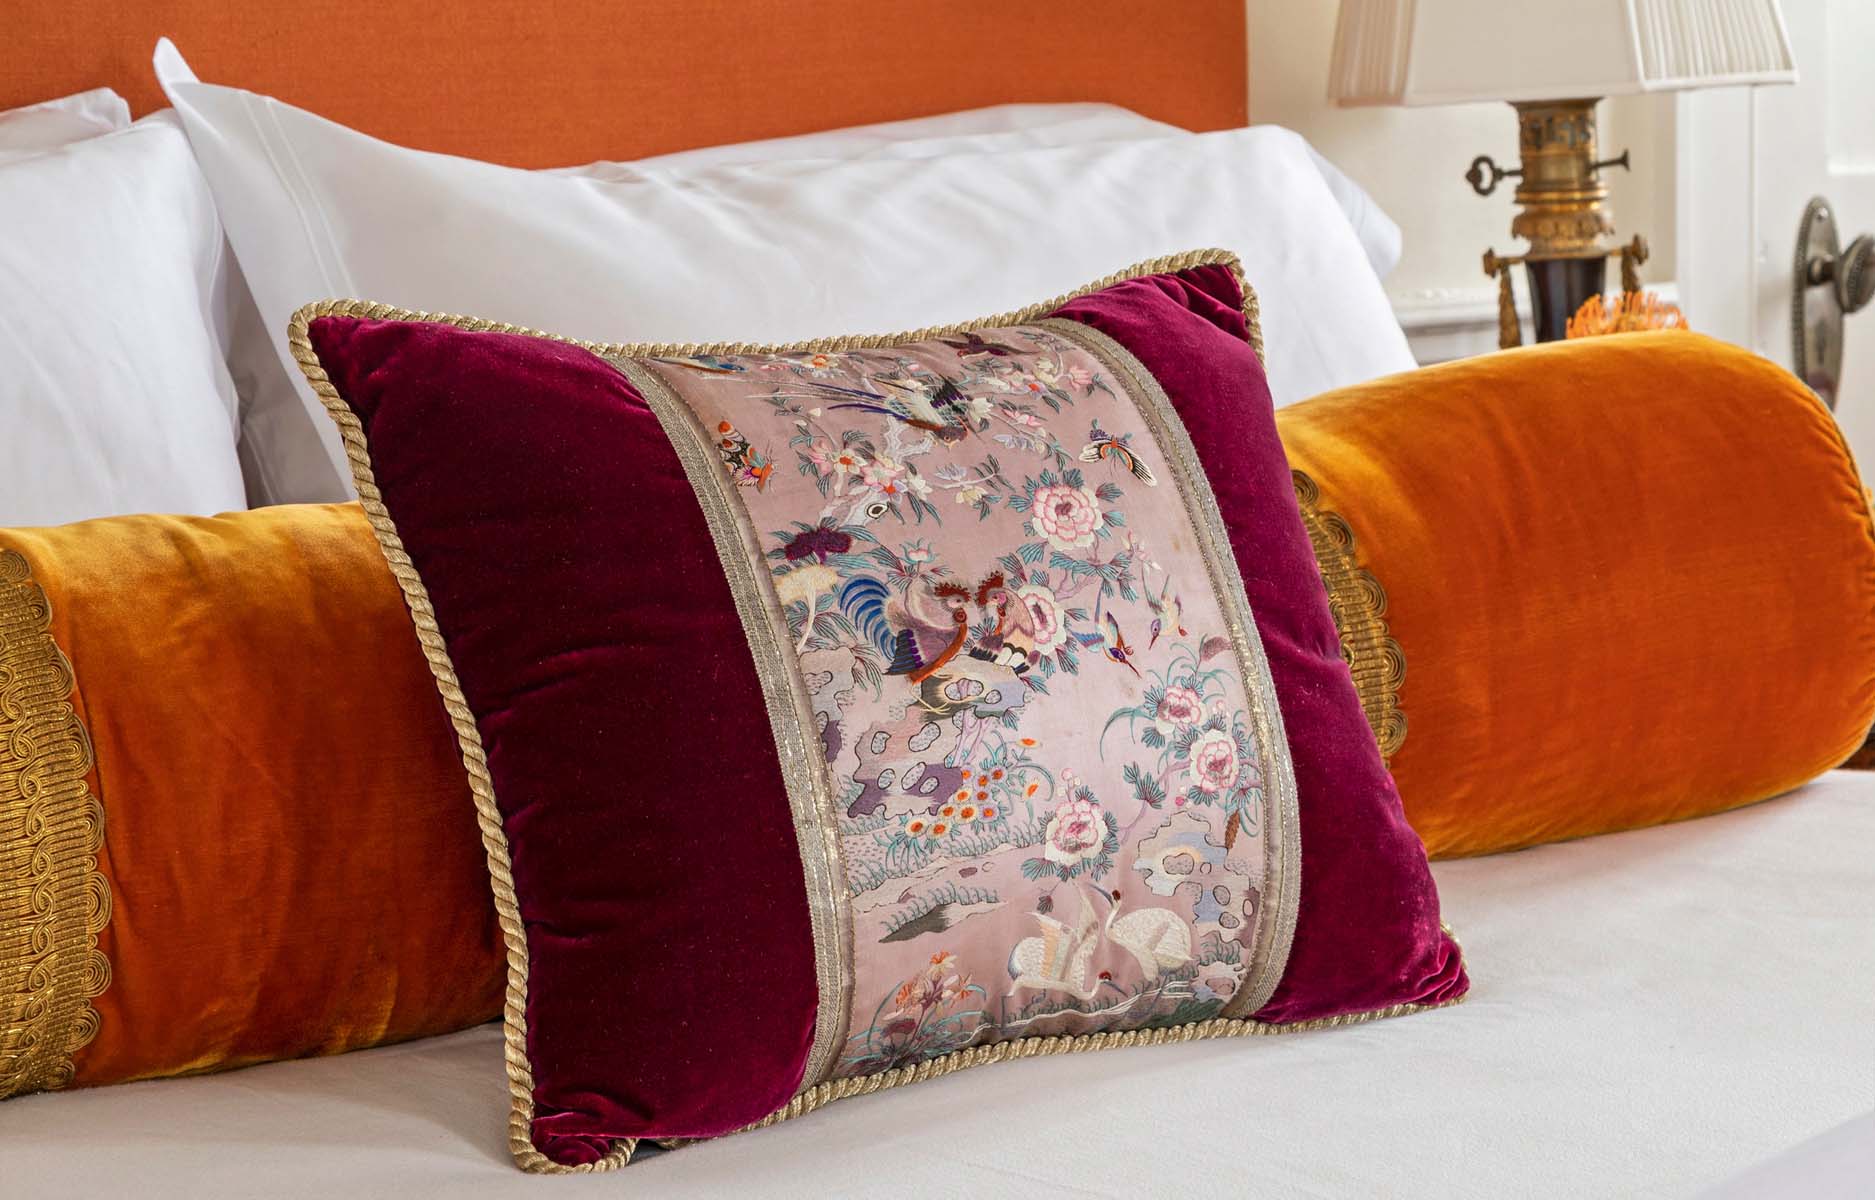 Bedroom pillow closeup with red and orange embroidered pillows